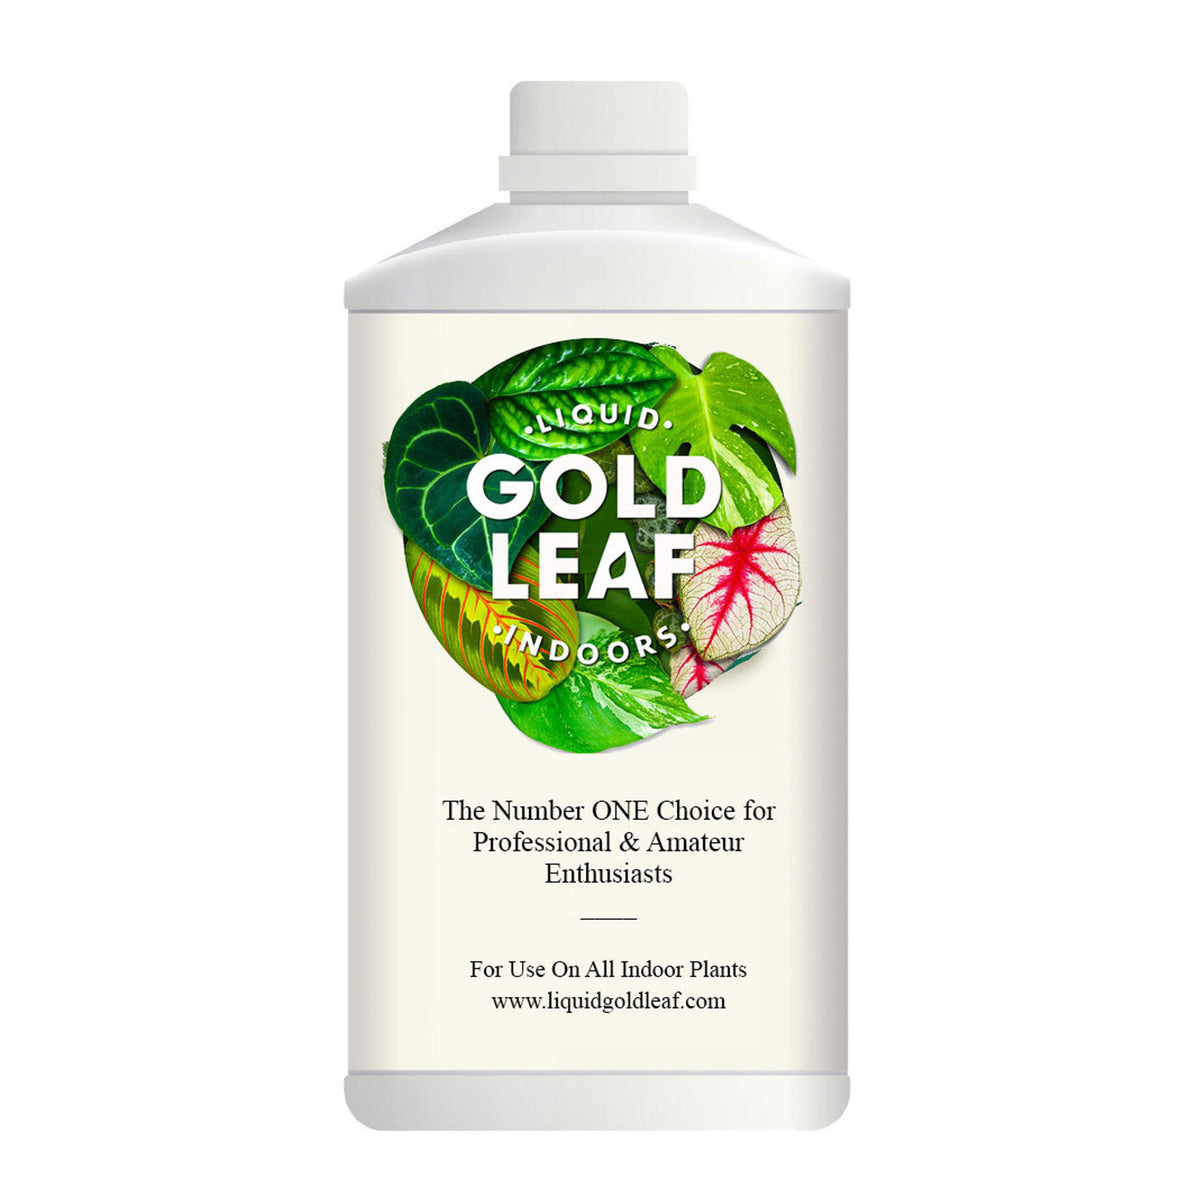 I took the plunge and ordered some Liquid Gold Leaf for my plant